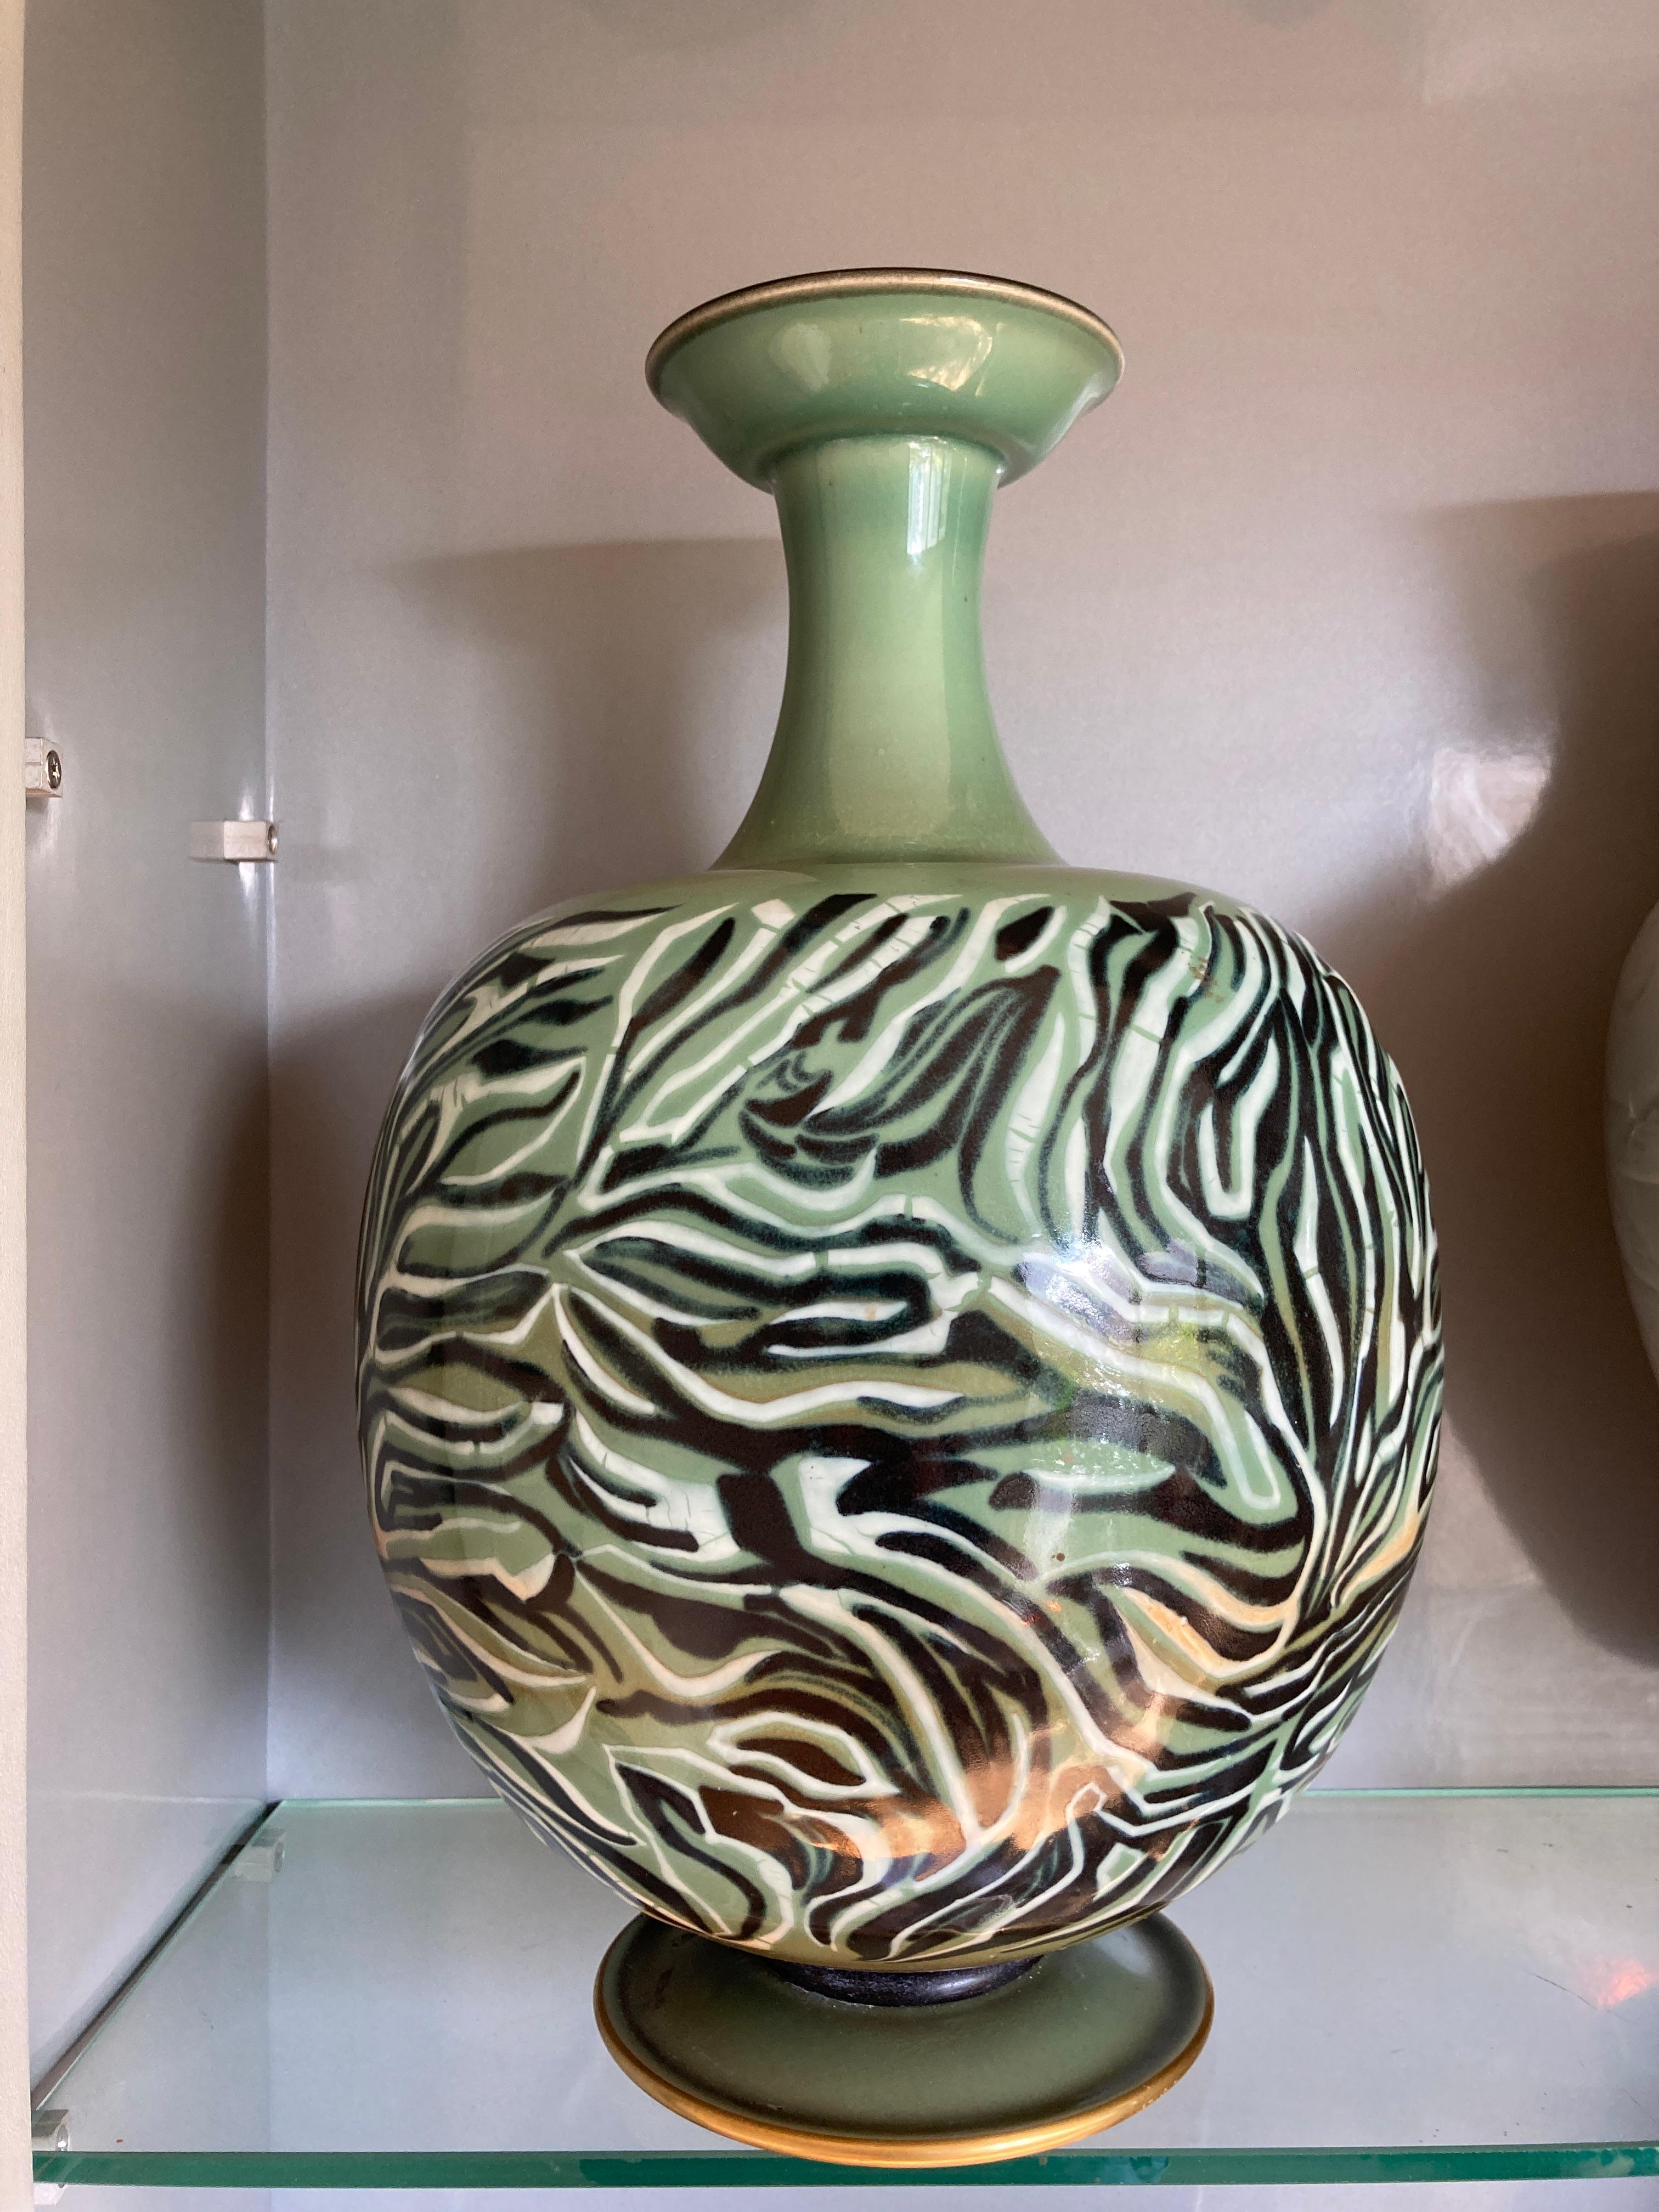 Very beautiful porcelain vase by Manufacture Nationale de Sèvres
Most famous porcelain factory in the world.
Vase signed by Andre Plantard
Dated 1963 
This is a rare piece located in museums and documented in books